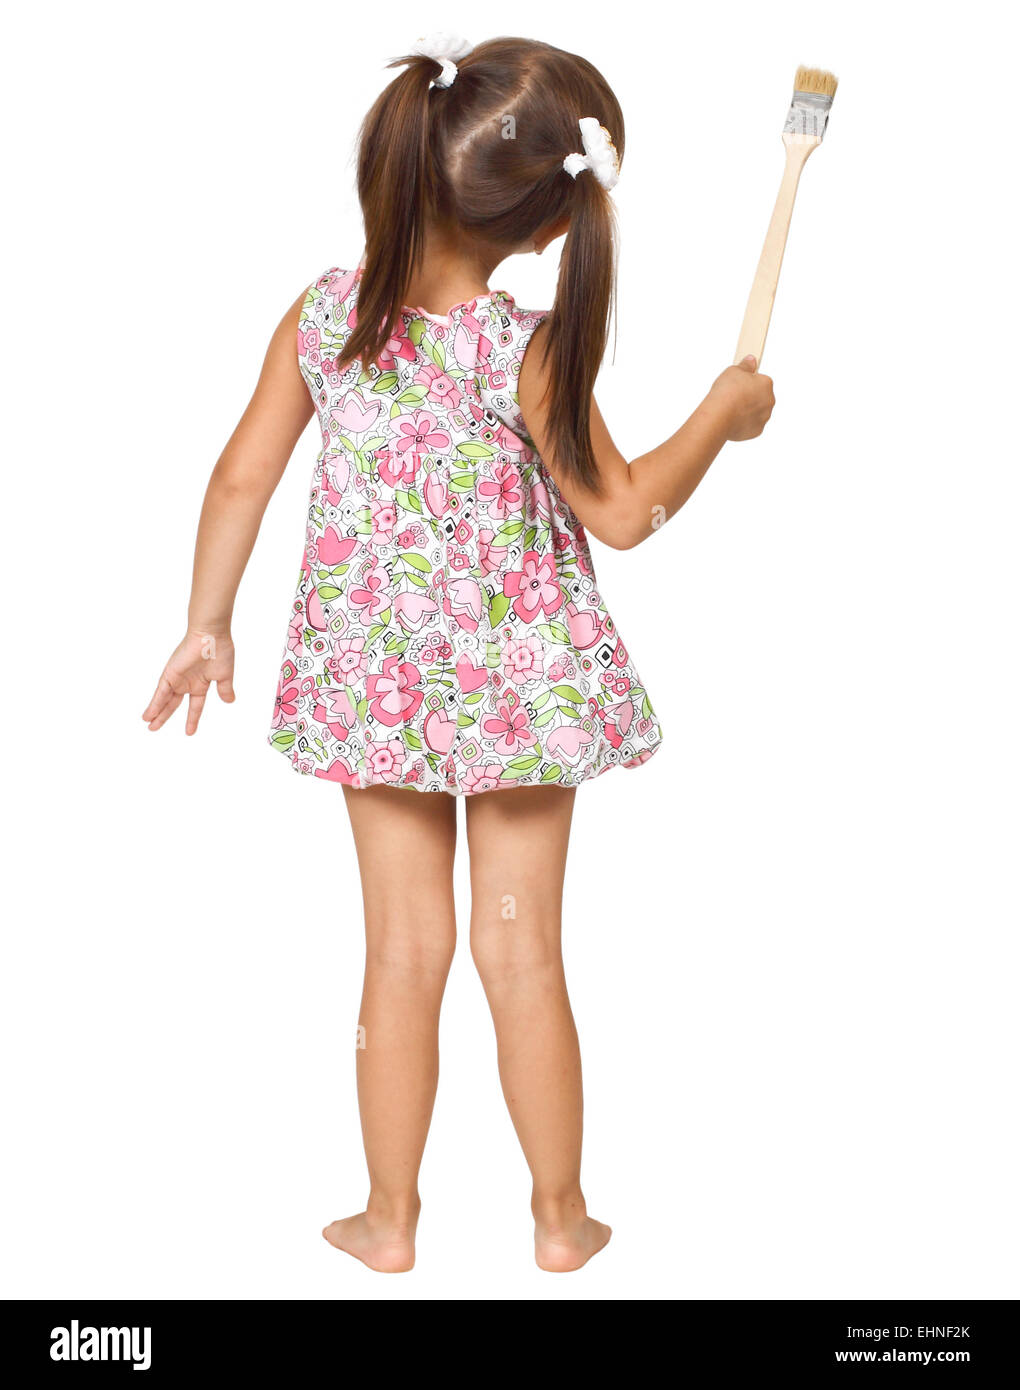 little girl with paintbrush, back view Stock Photo